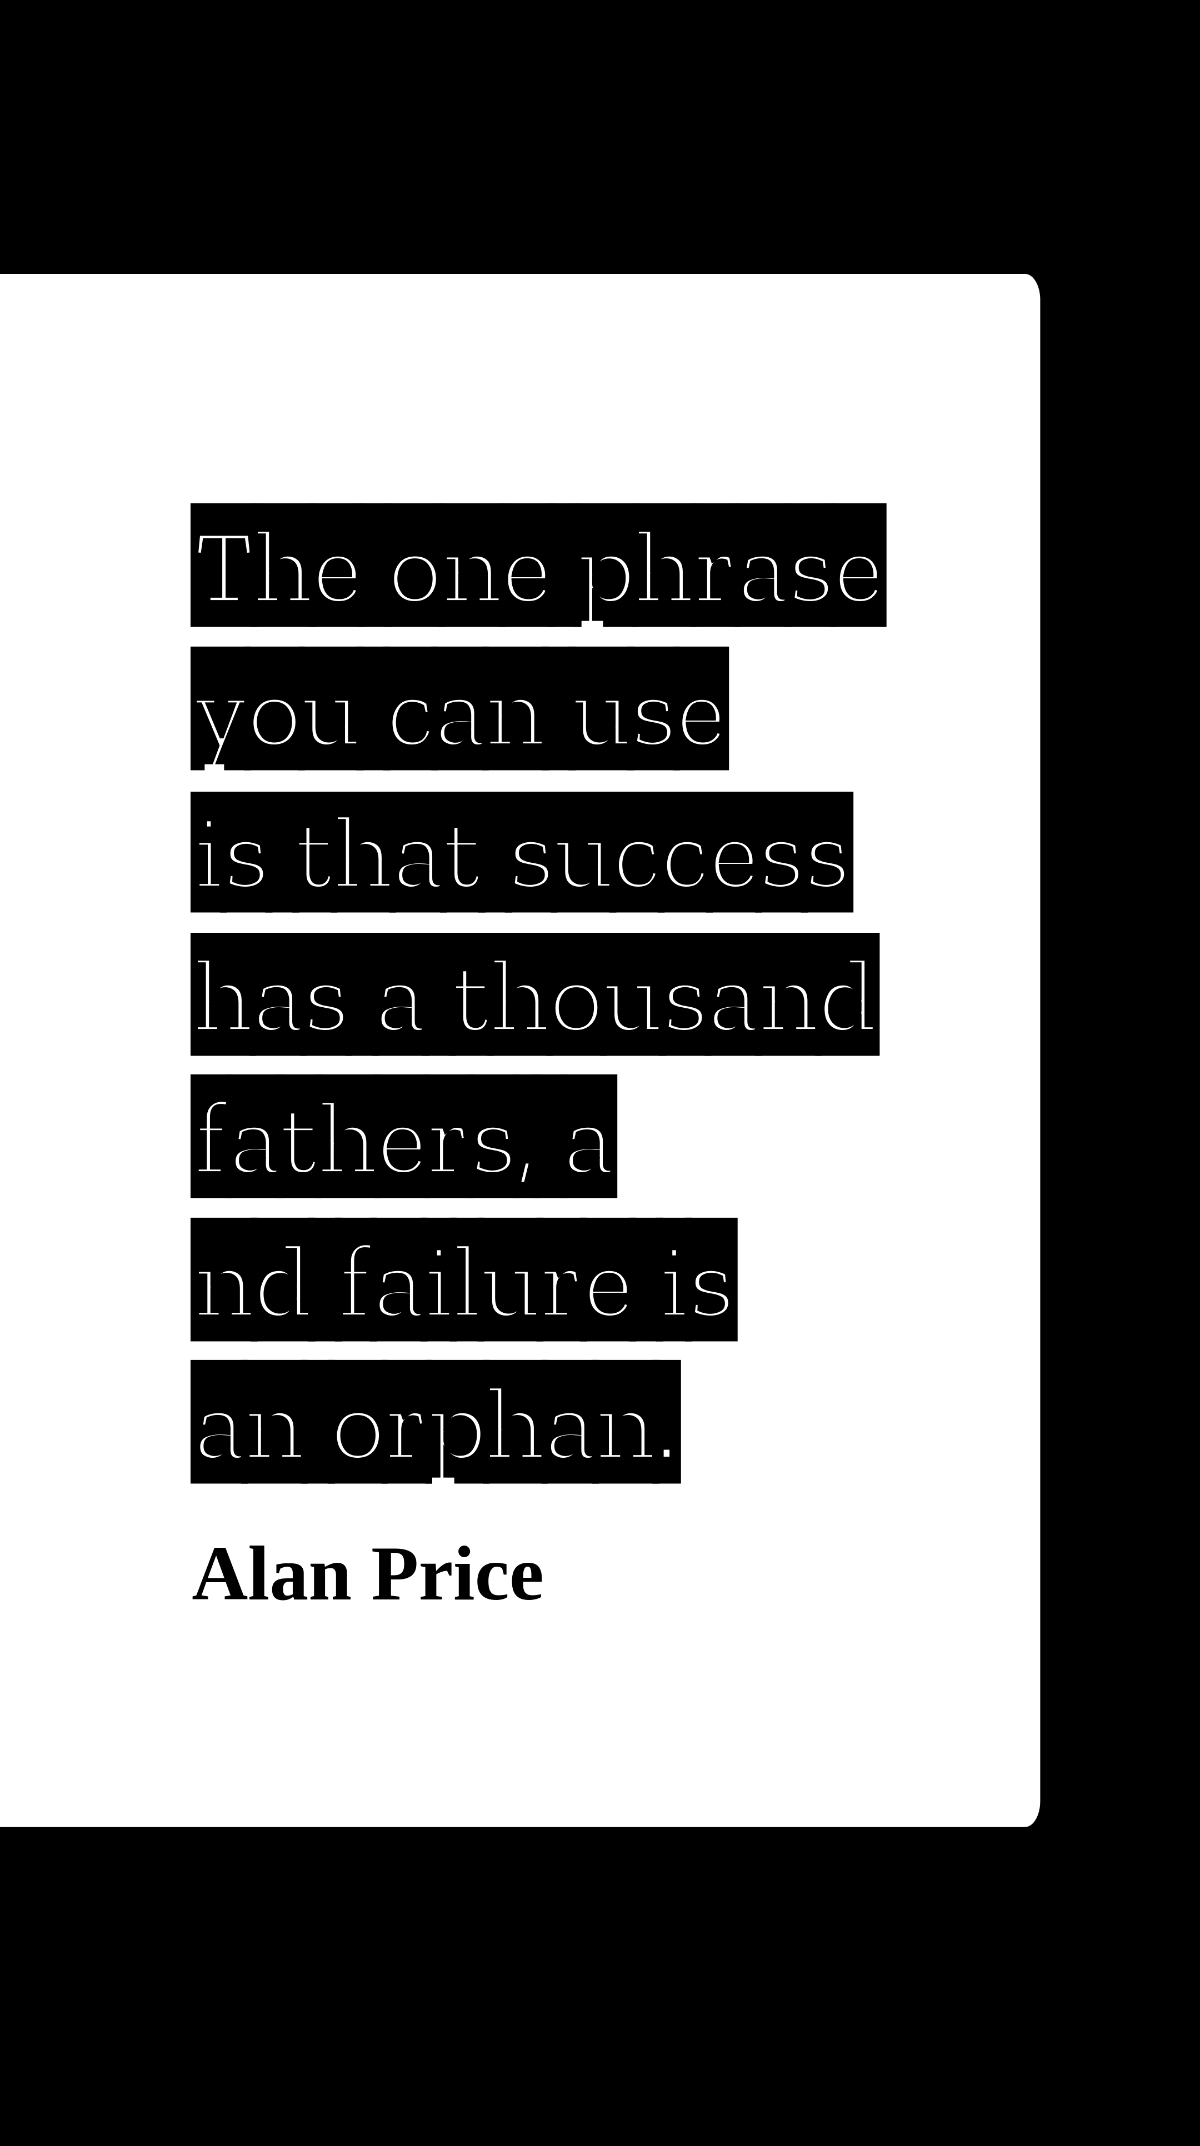 Free Alan Price - The one phrase you can use is that success has a thousand fathers, and failure is an orphan. Template